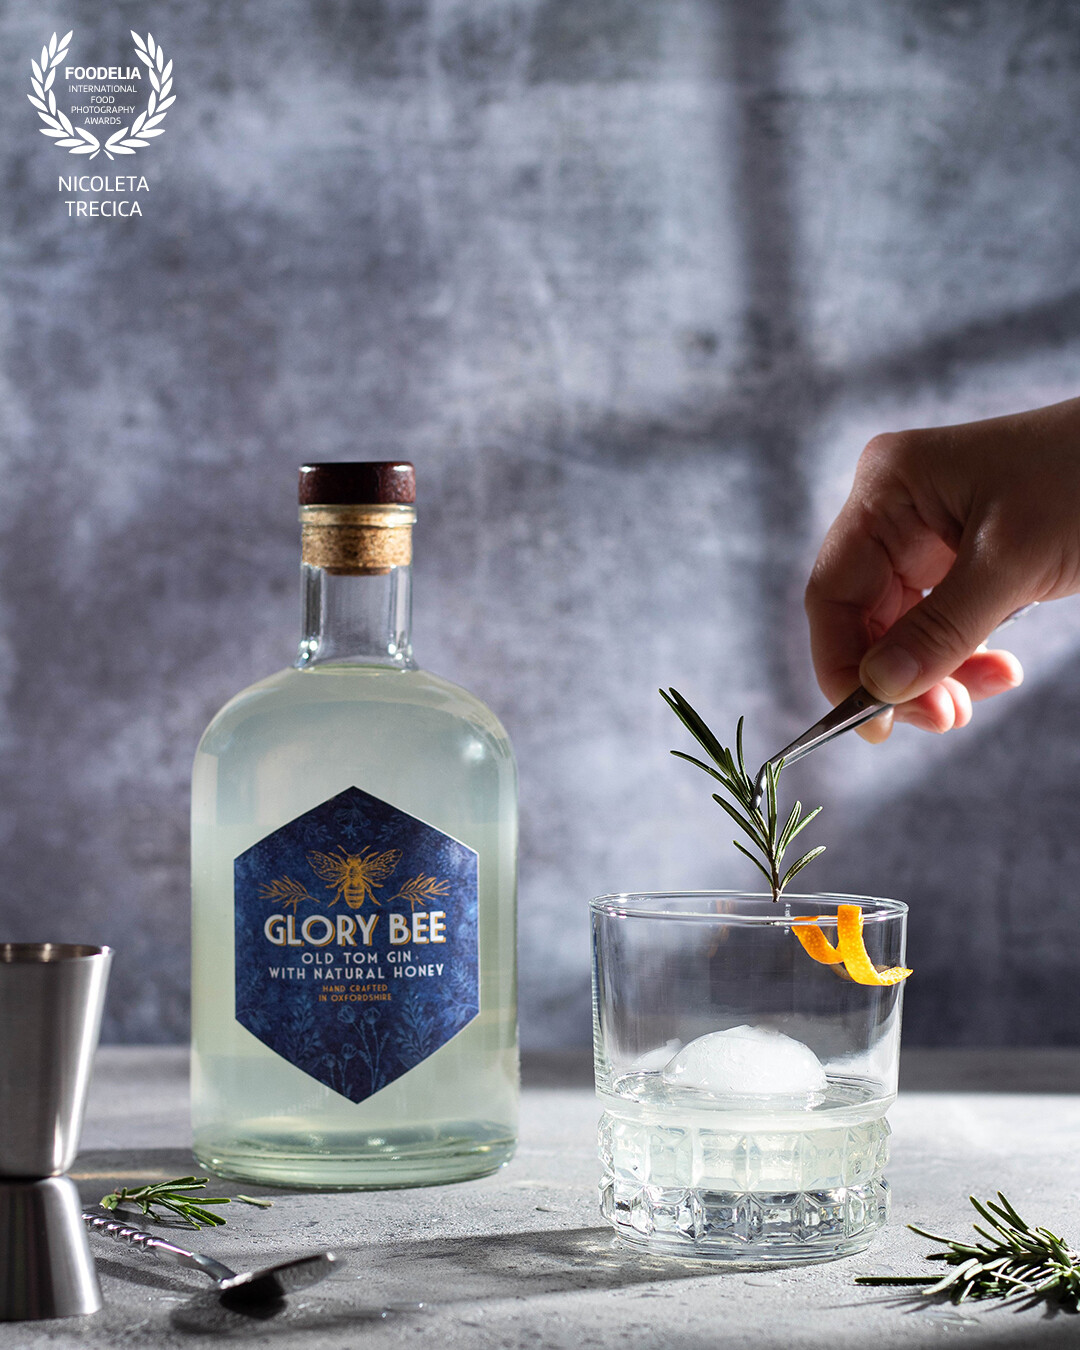 This image was created for a client. The request was to have a shot focusing only on the gin, being a smooth drink. Having a human element in action, it gives the feeling that the drink is ready to be served.